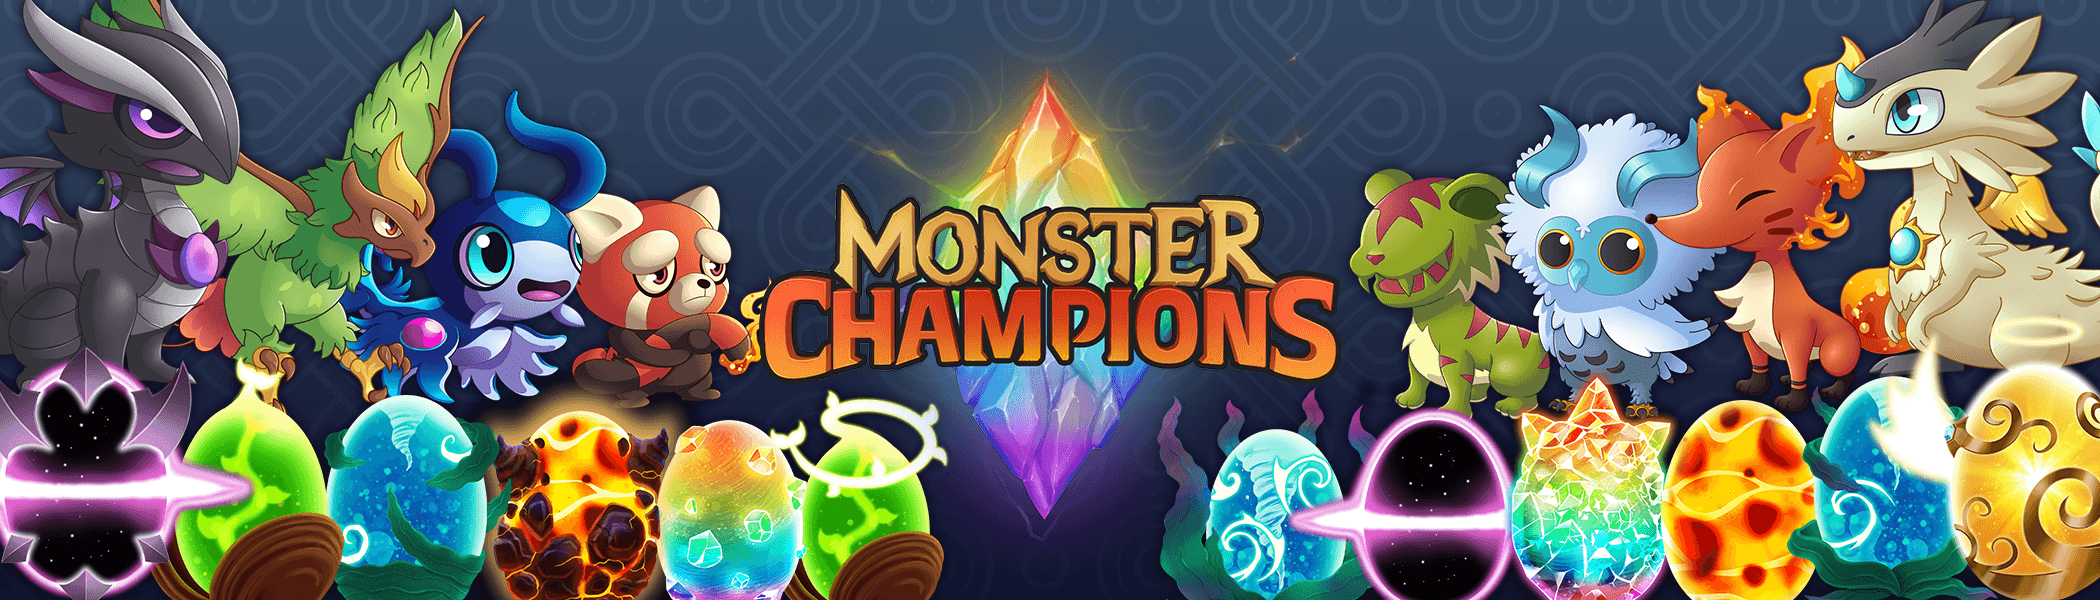 Monster Champions Menagerie